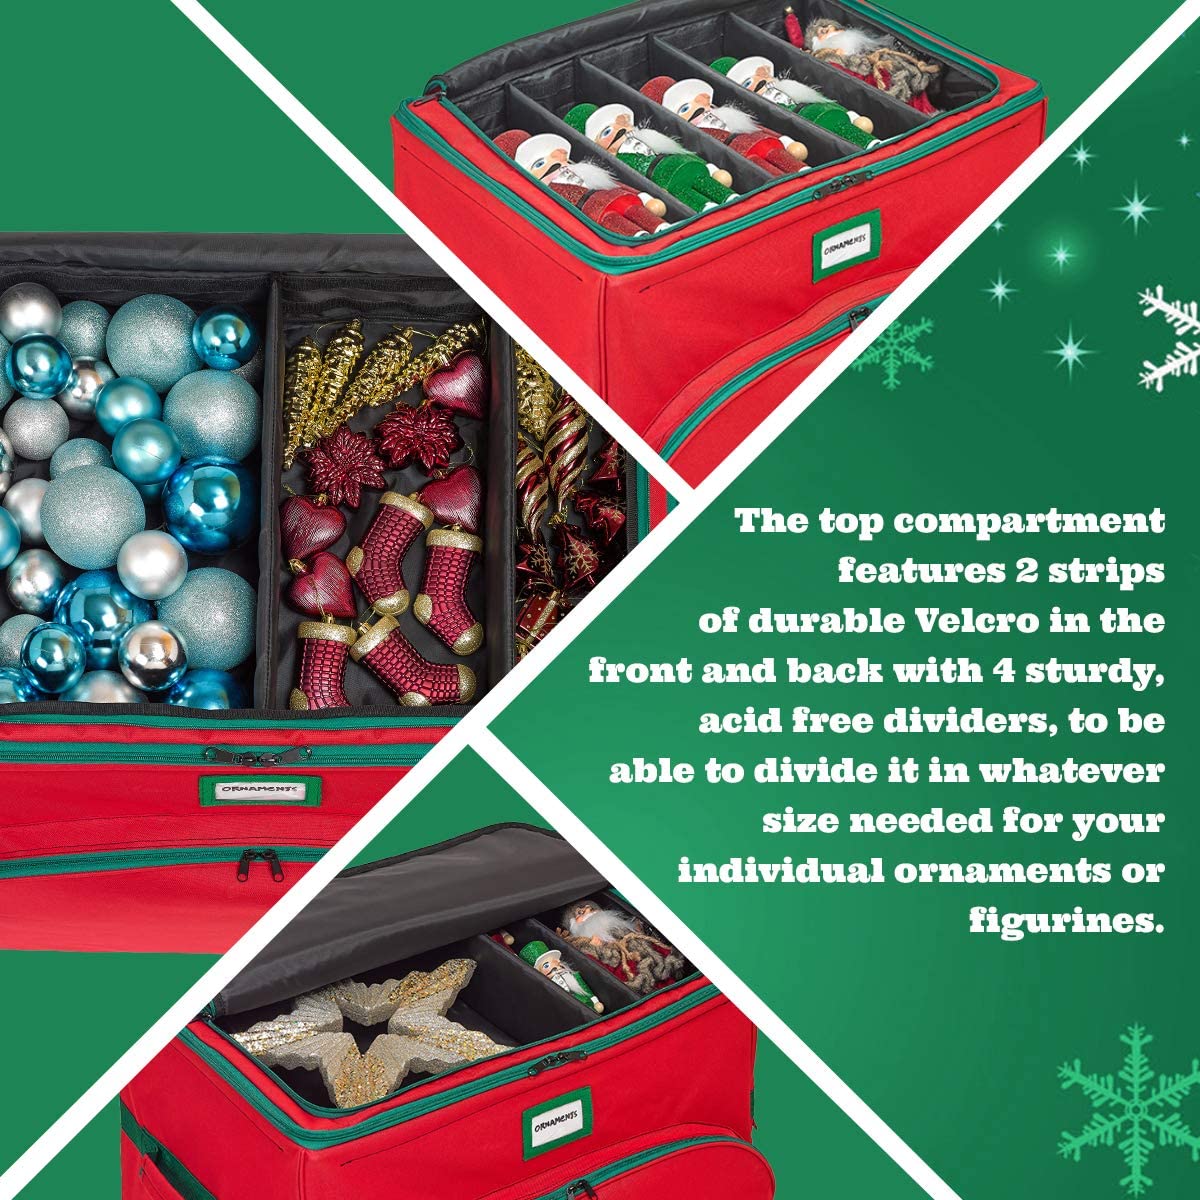 Christmas Ornament Storage Box - Holds Up to 72 Ornaments 4” x 4” Adjustable Compartments for Figurines, Nutcrackers, etc. - 600D/ Inside PVC Material